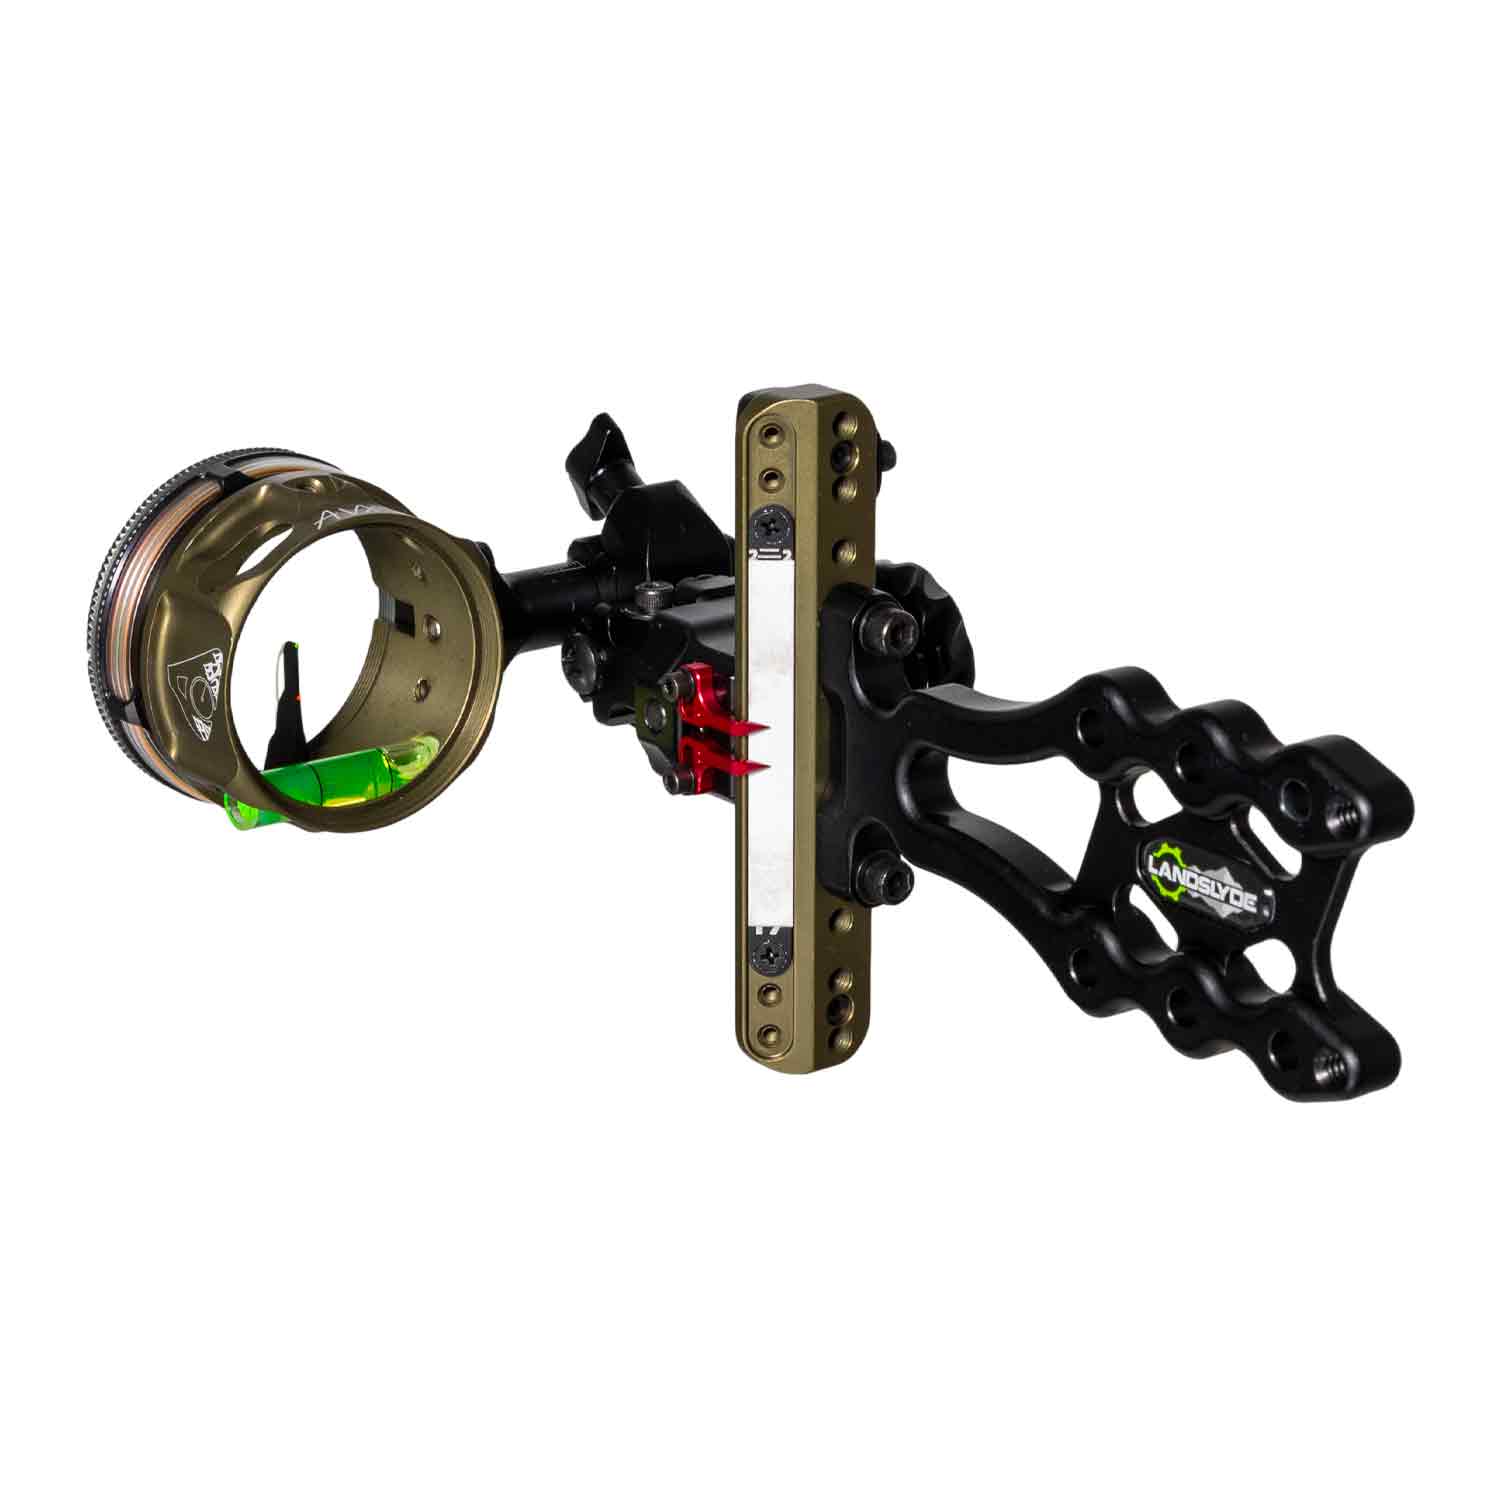 Axcel Landslyde Tactical Bowhunting Slider Sight w/AVX-41 Scope (.010